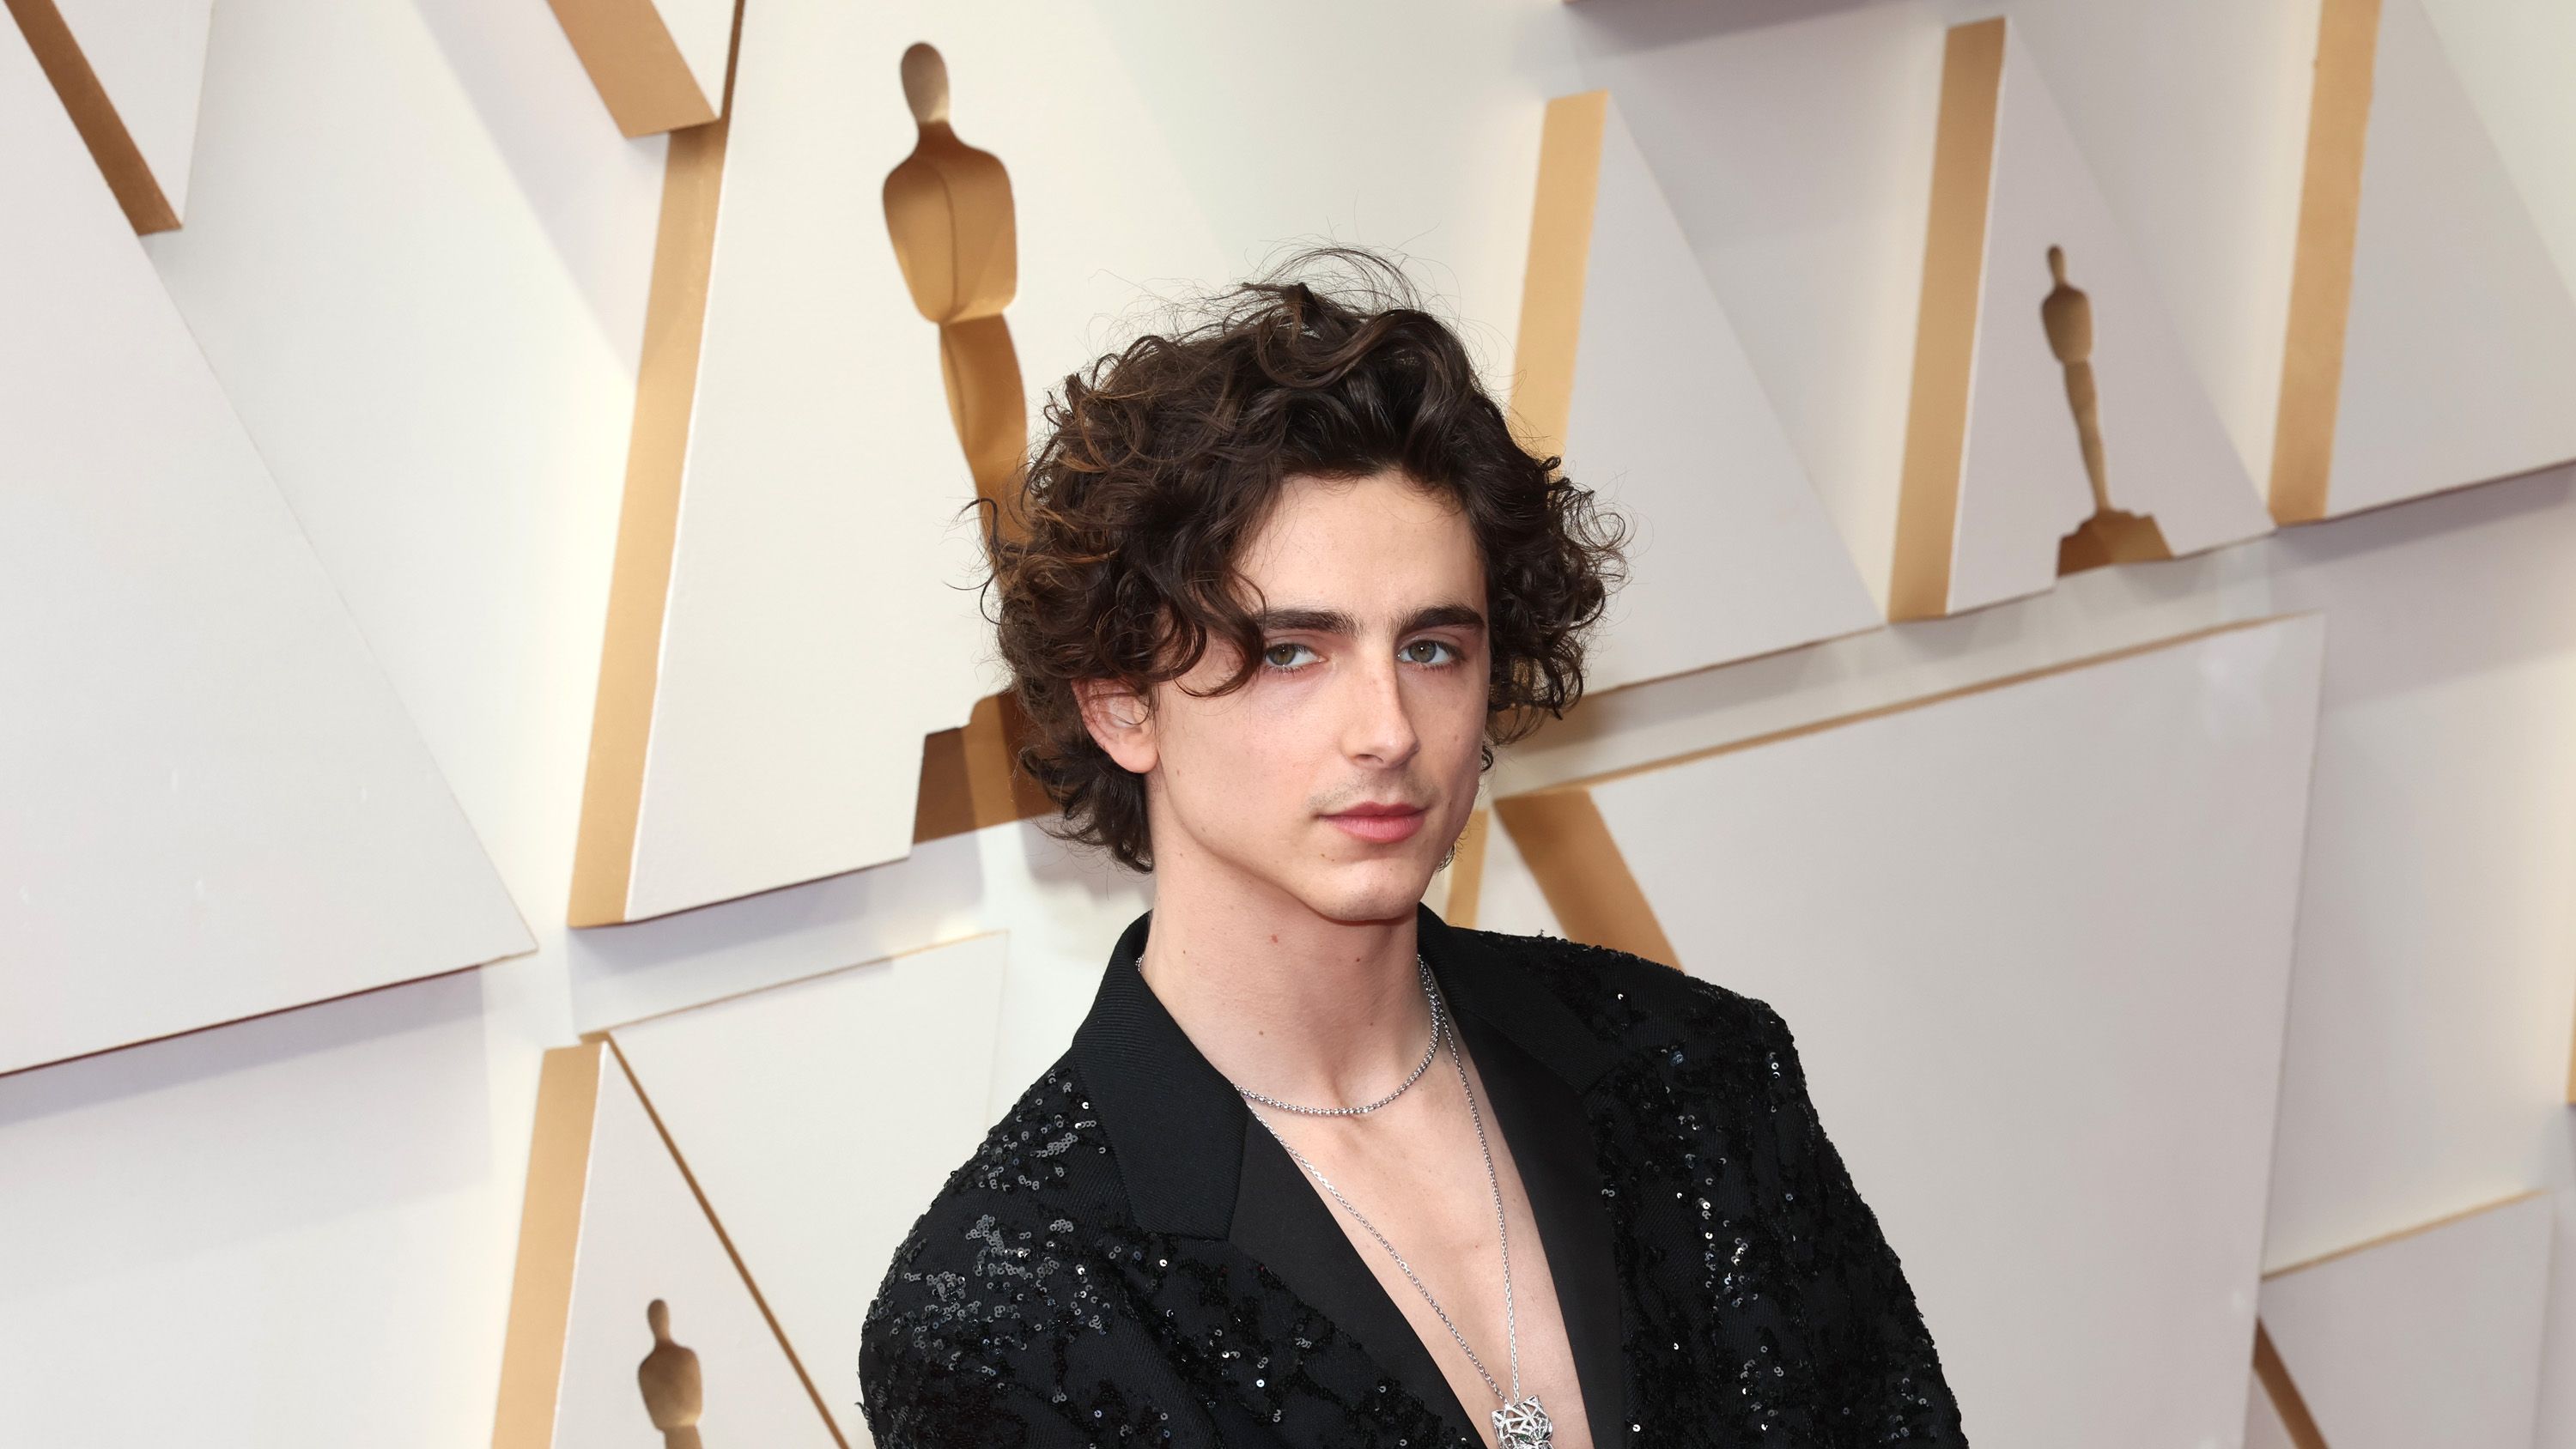 Oscars Fashion 2022: The Young and the Shirtless